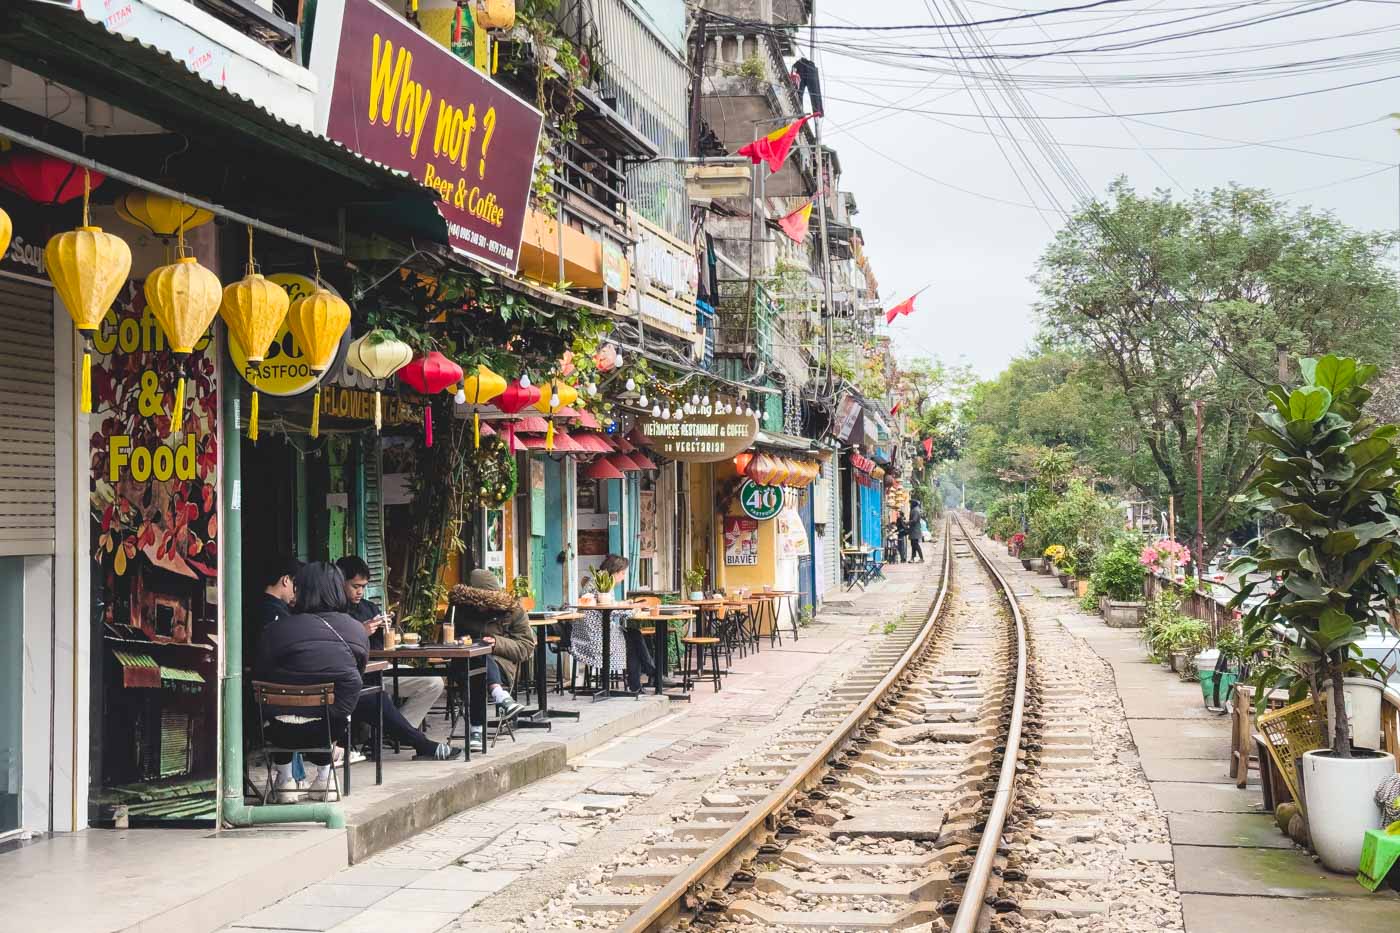 People sitting in cafes lined along the railway track of Hanoi Train Street.